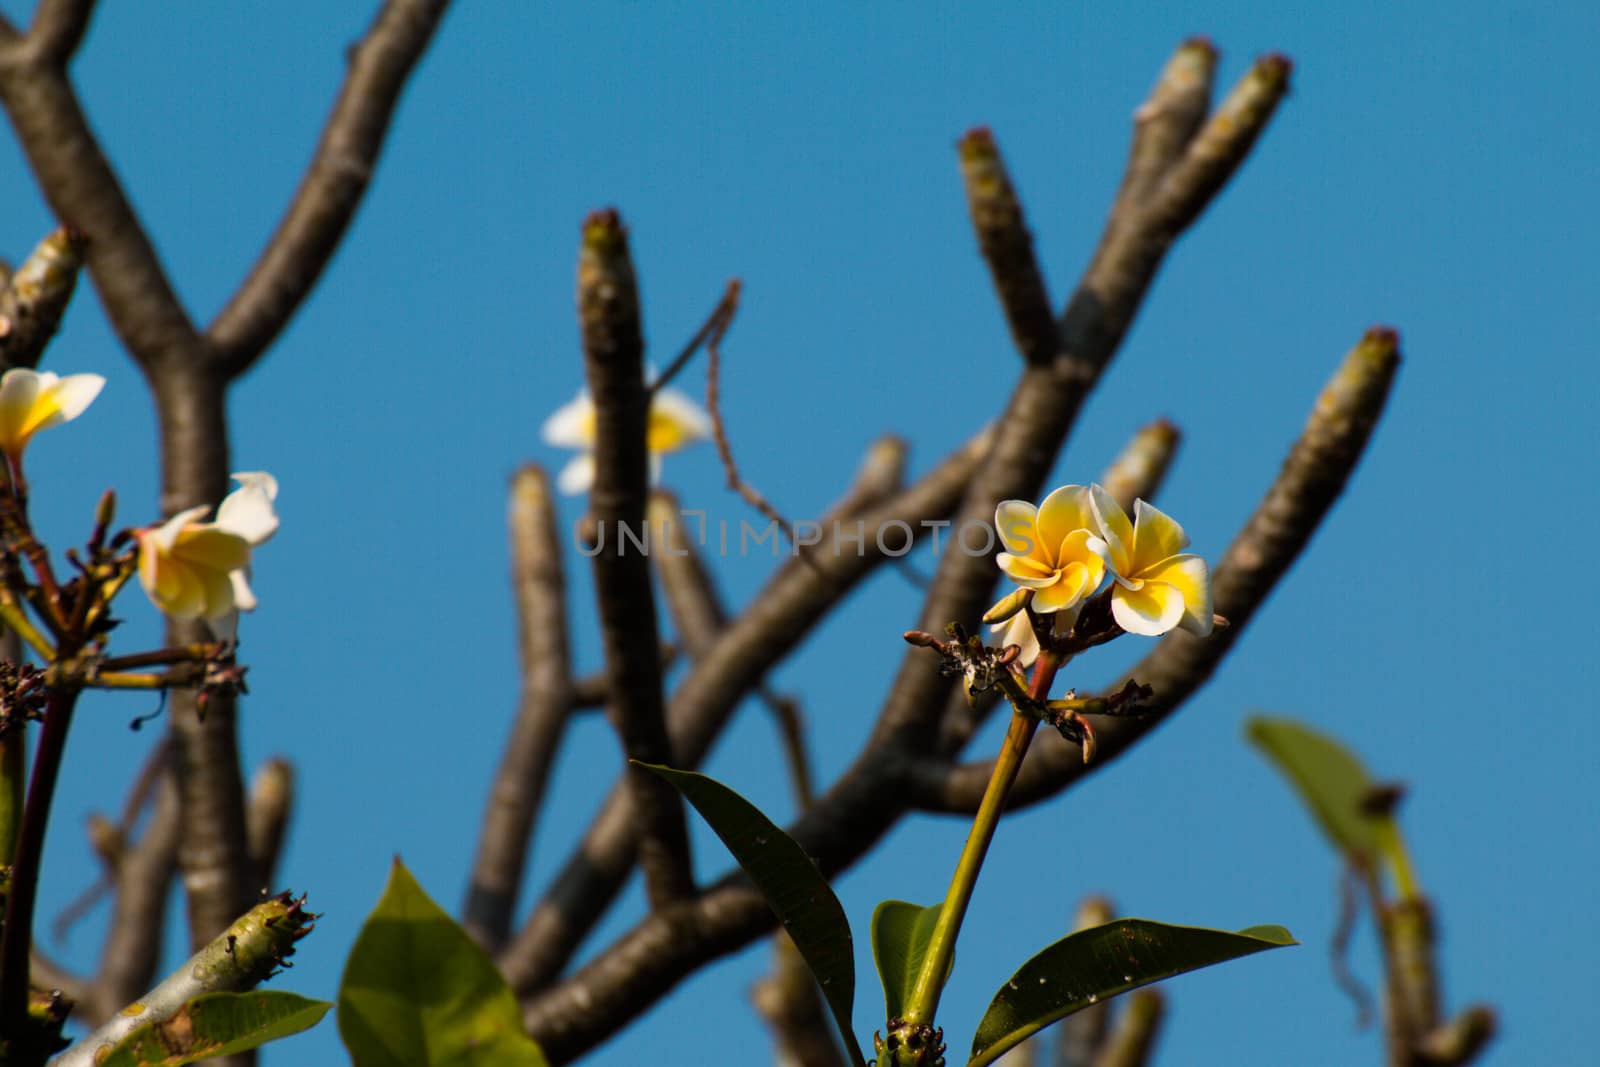 The most beatiful plumeria flowers, yellow  and white colors. by N_u_T